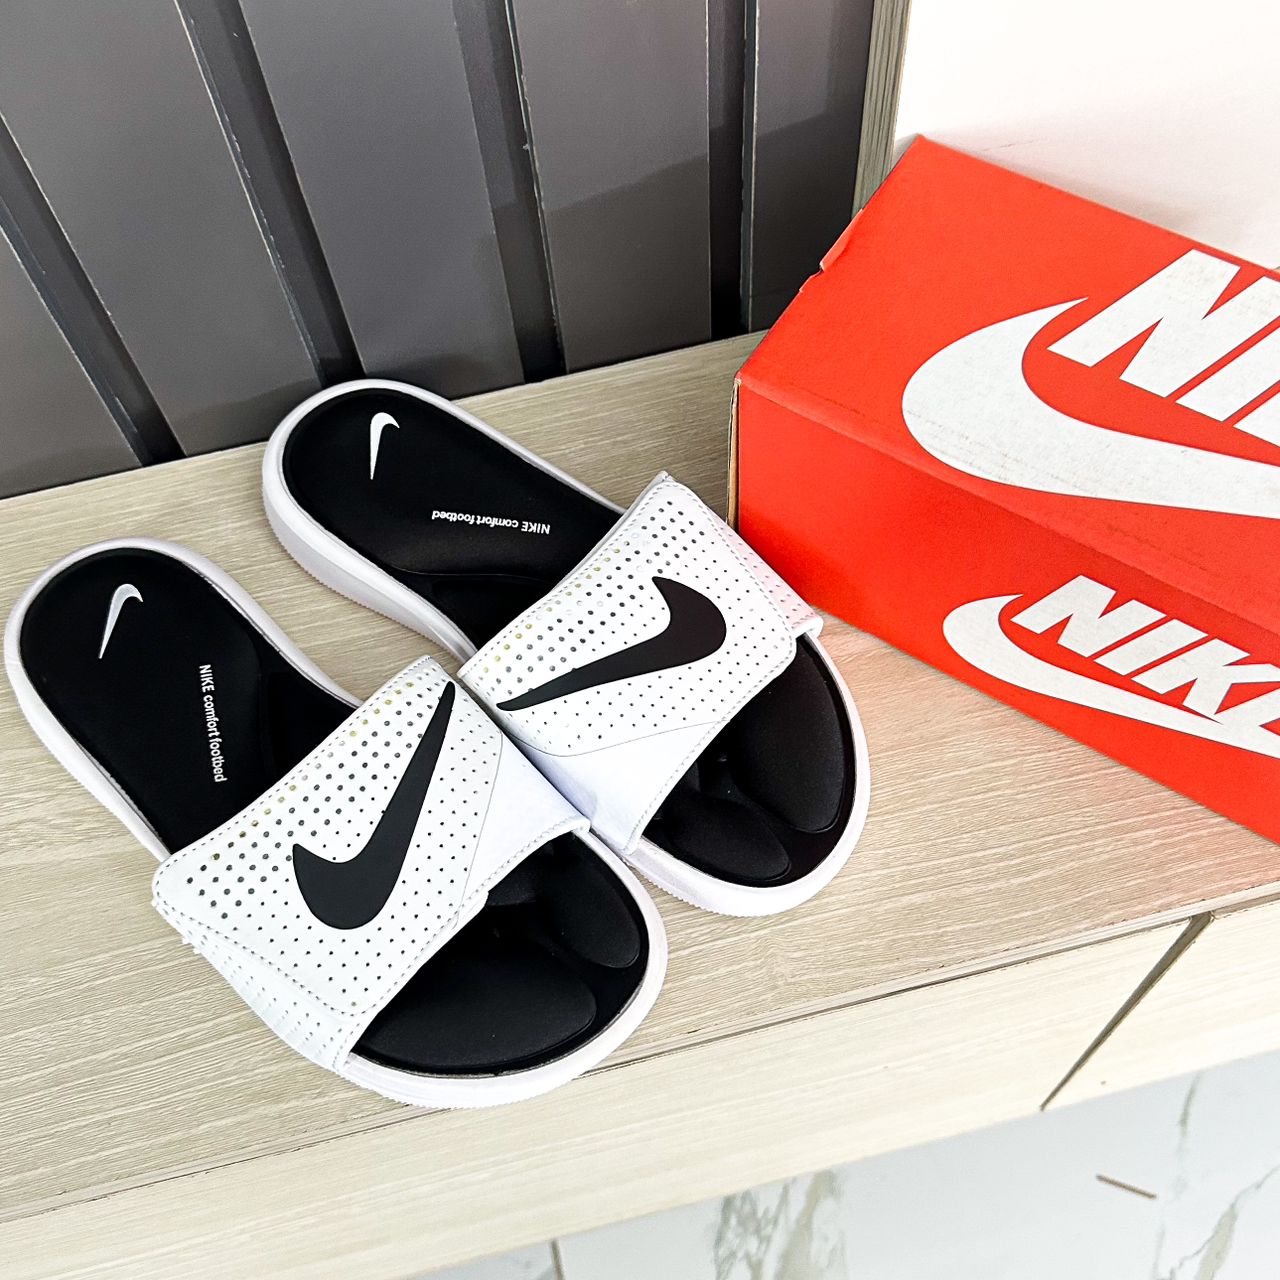 248 on X: "NIKE COMFORT FOOTBED SLIDES NOW AVAILABLE IN STORE 👟: 40 - 45 🏷️: 23k(Naira) 🚚: Nationwide Delivery Send a DM or click https://t.co/aRphXweJGC to place your https://t.co/TWWHlYZvYc" /